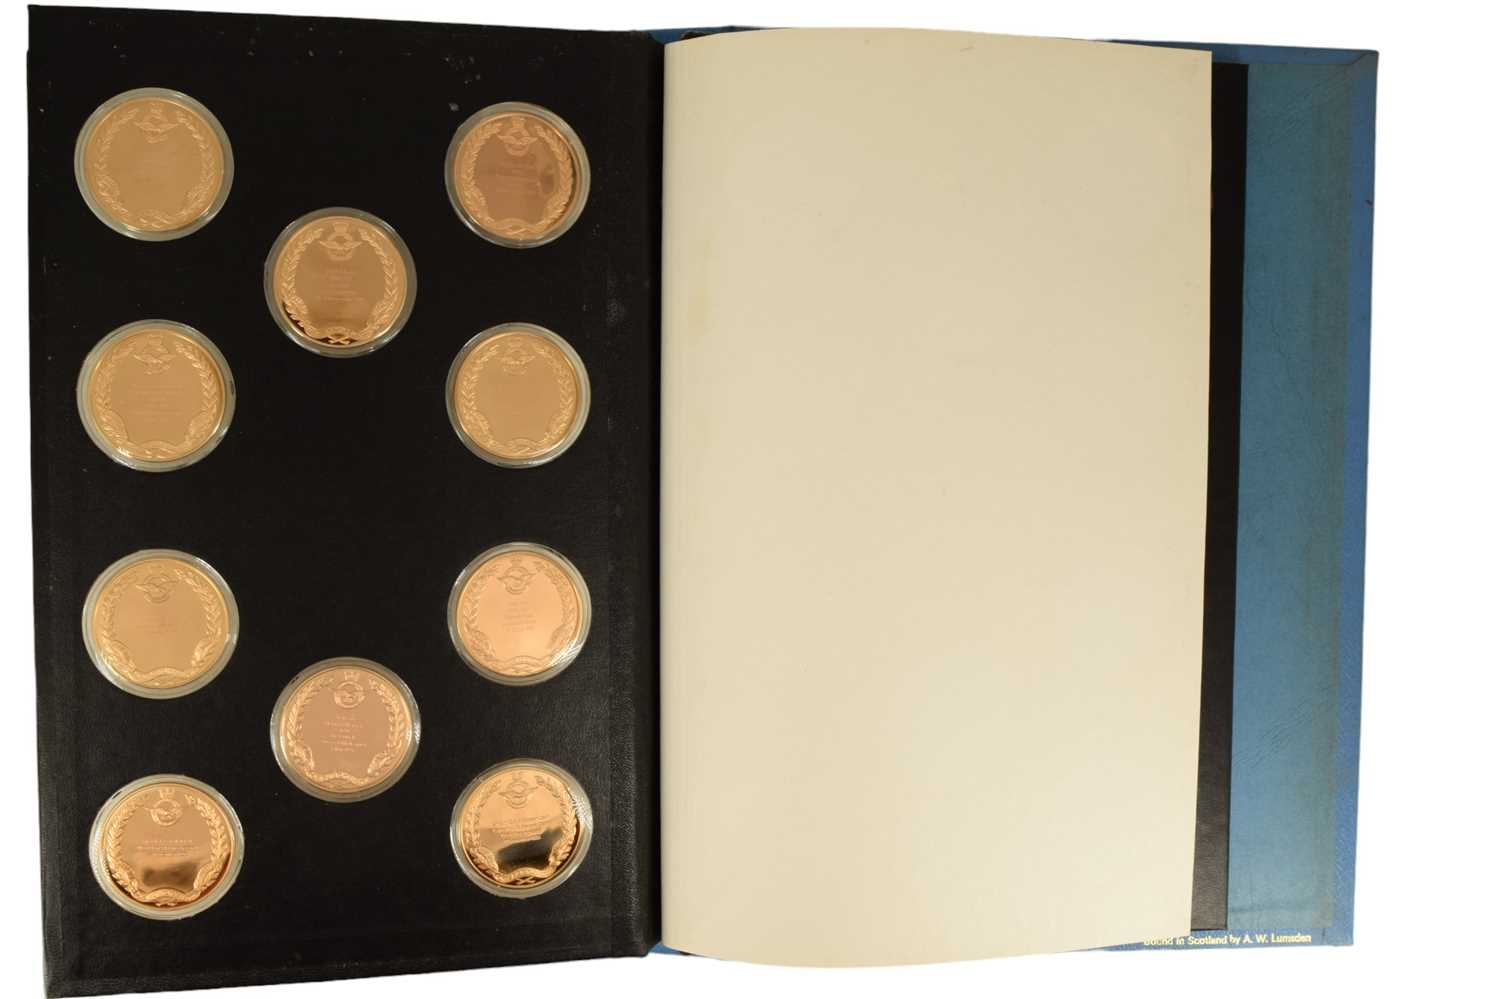 The History of Man in Flight bronze medal album for The Royal Airforce Museum by Franklin Mint Ltd - Image 13 of 15